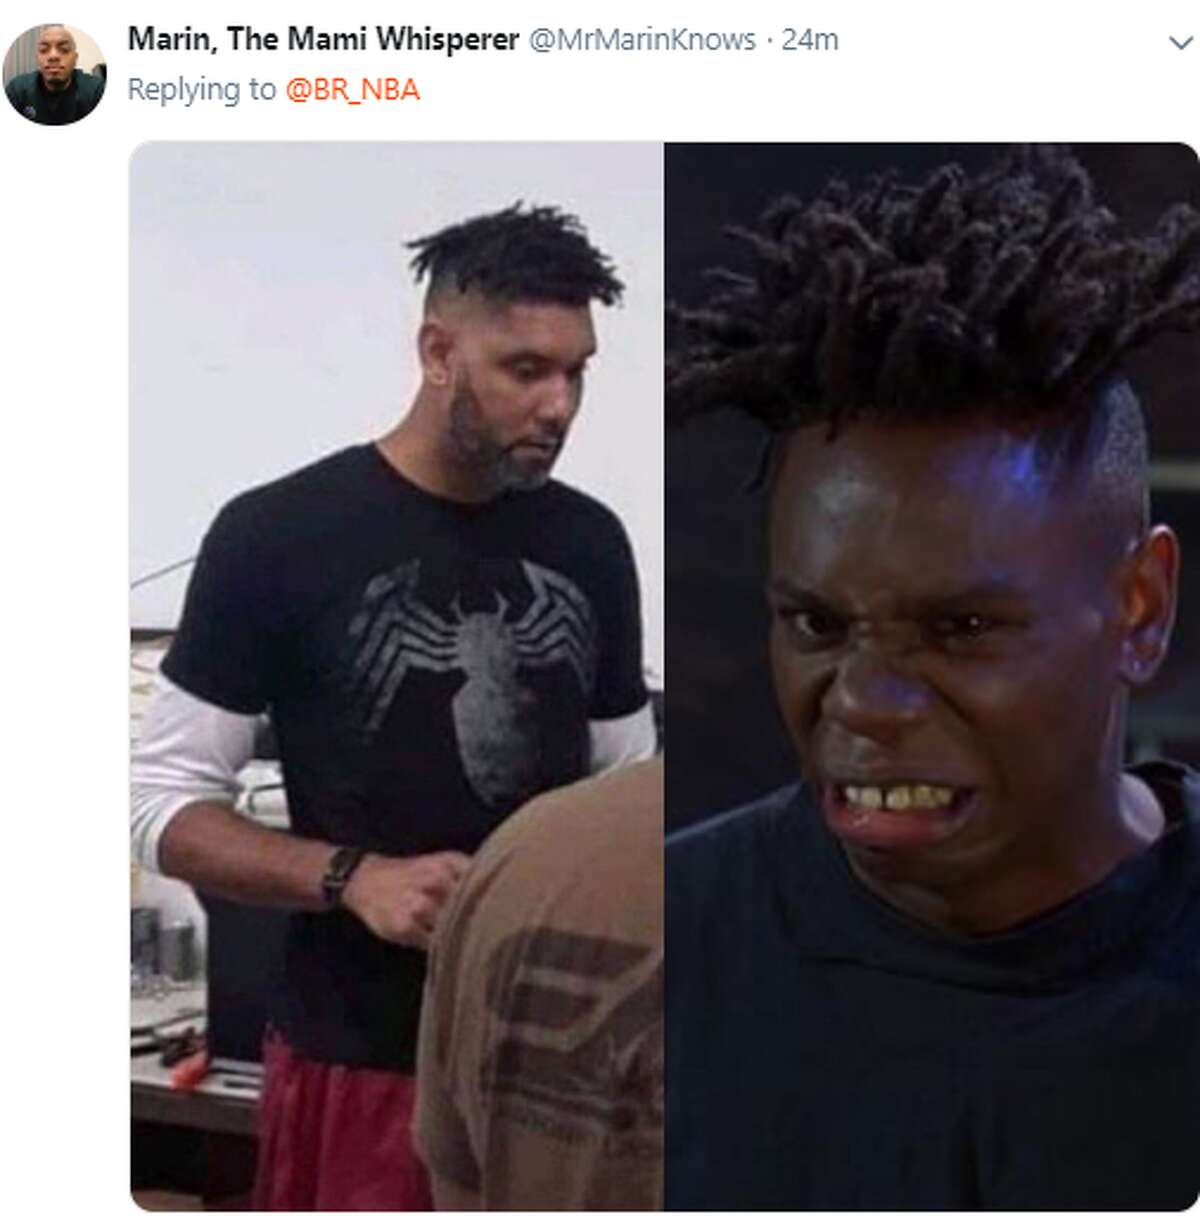 Tim Duncan's new hairdo has the internet comparing him to 21 Savage, 'The  Nutty Professor' character